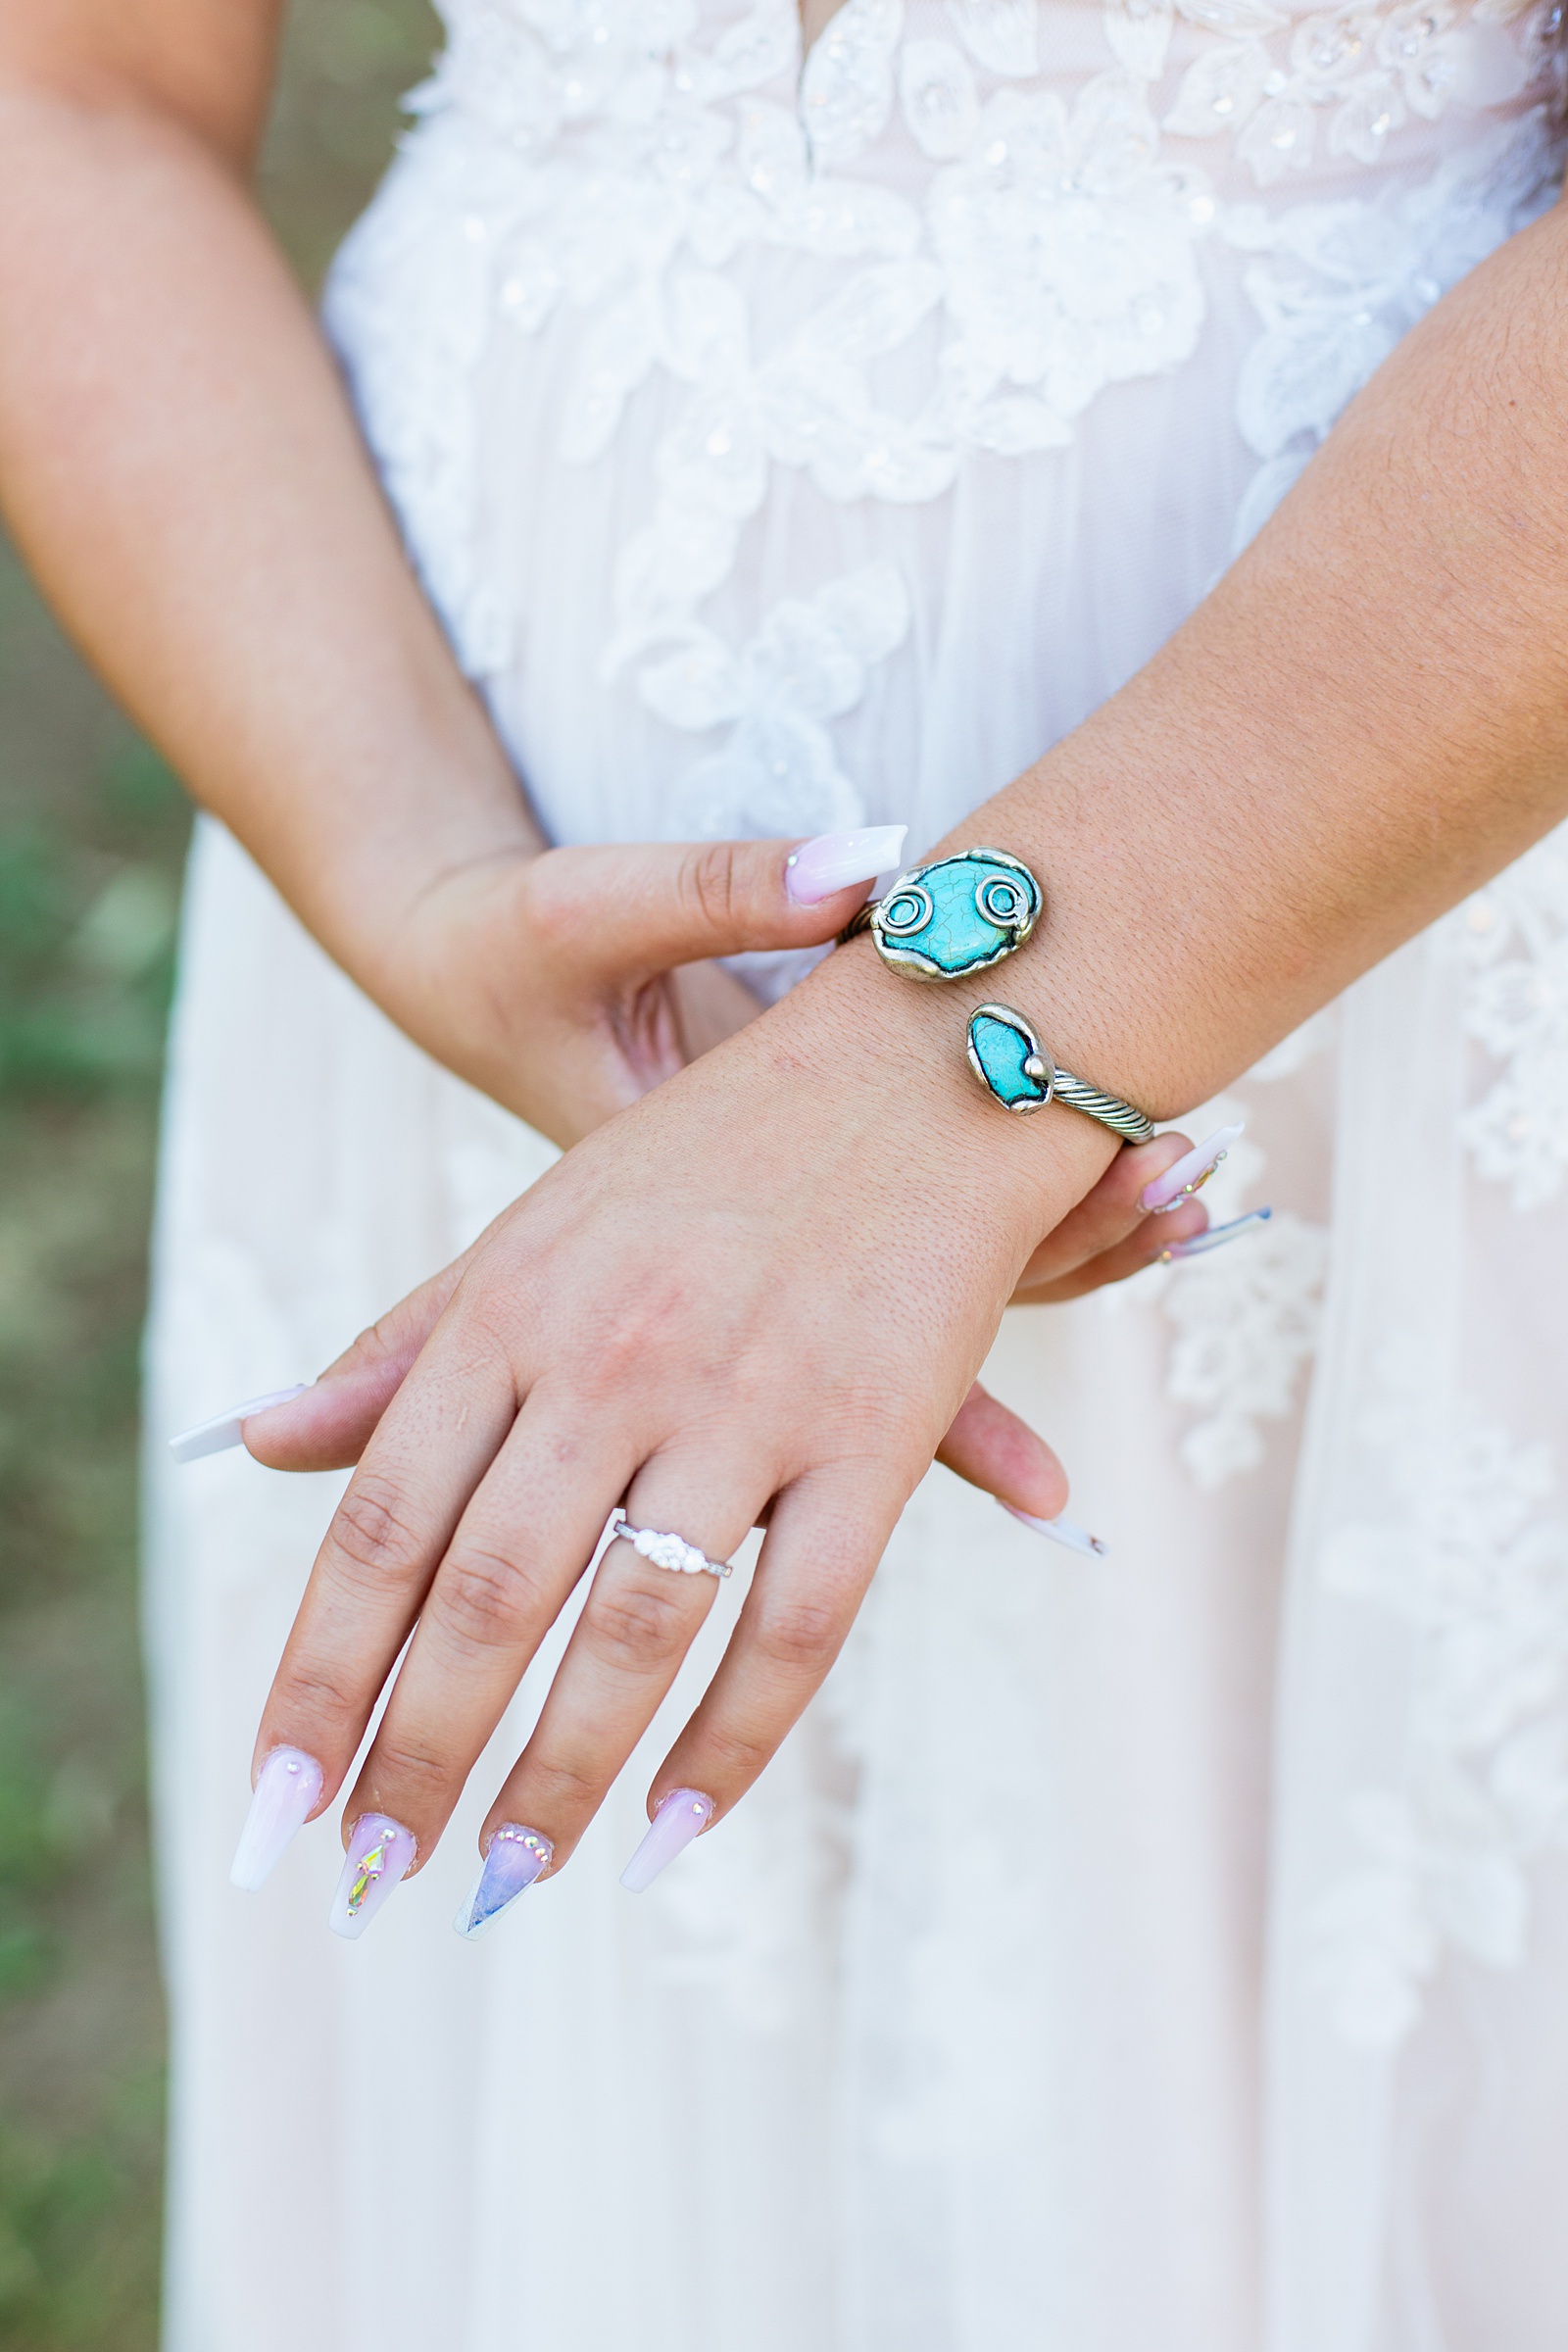 Bride's wedding day details of turquoise bracelet and bridal acrylic nails by Juniper and Co Photography.